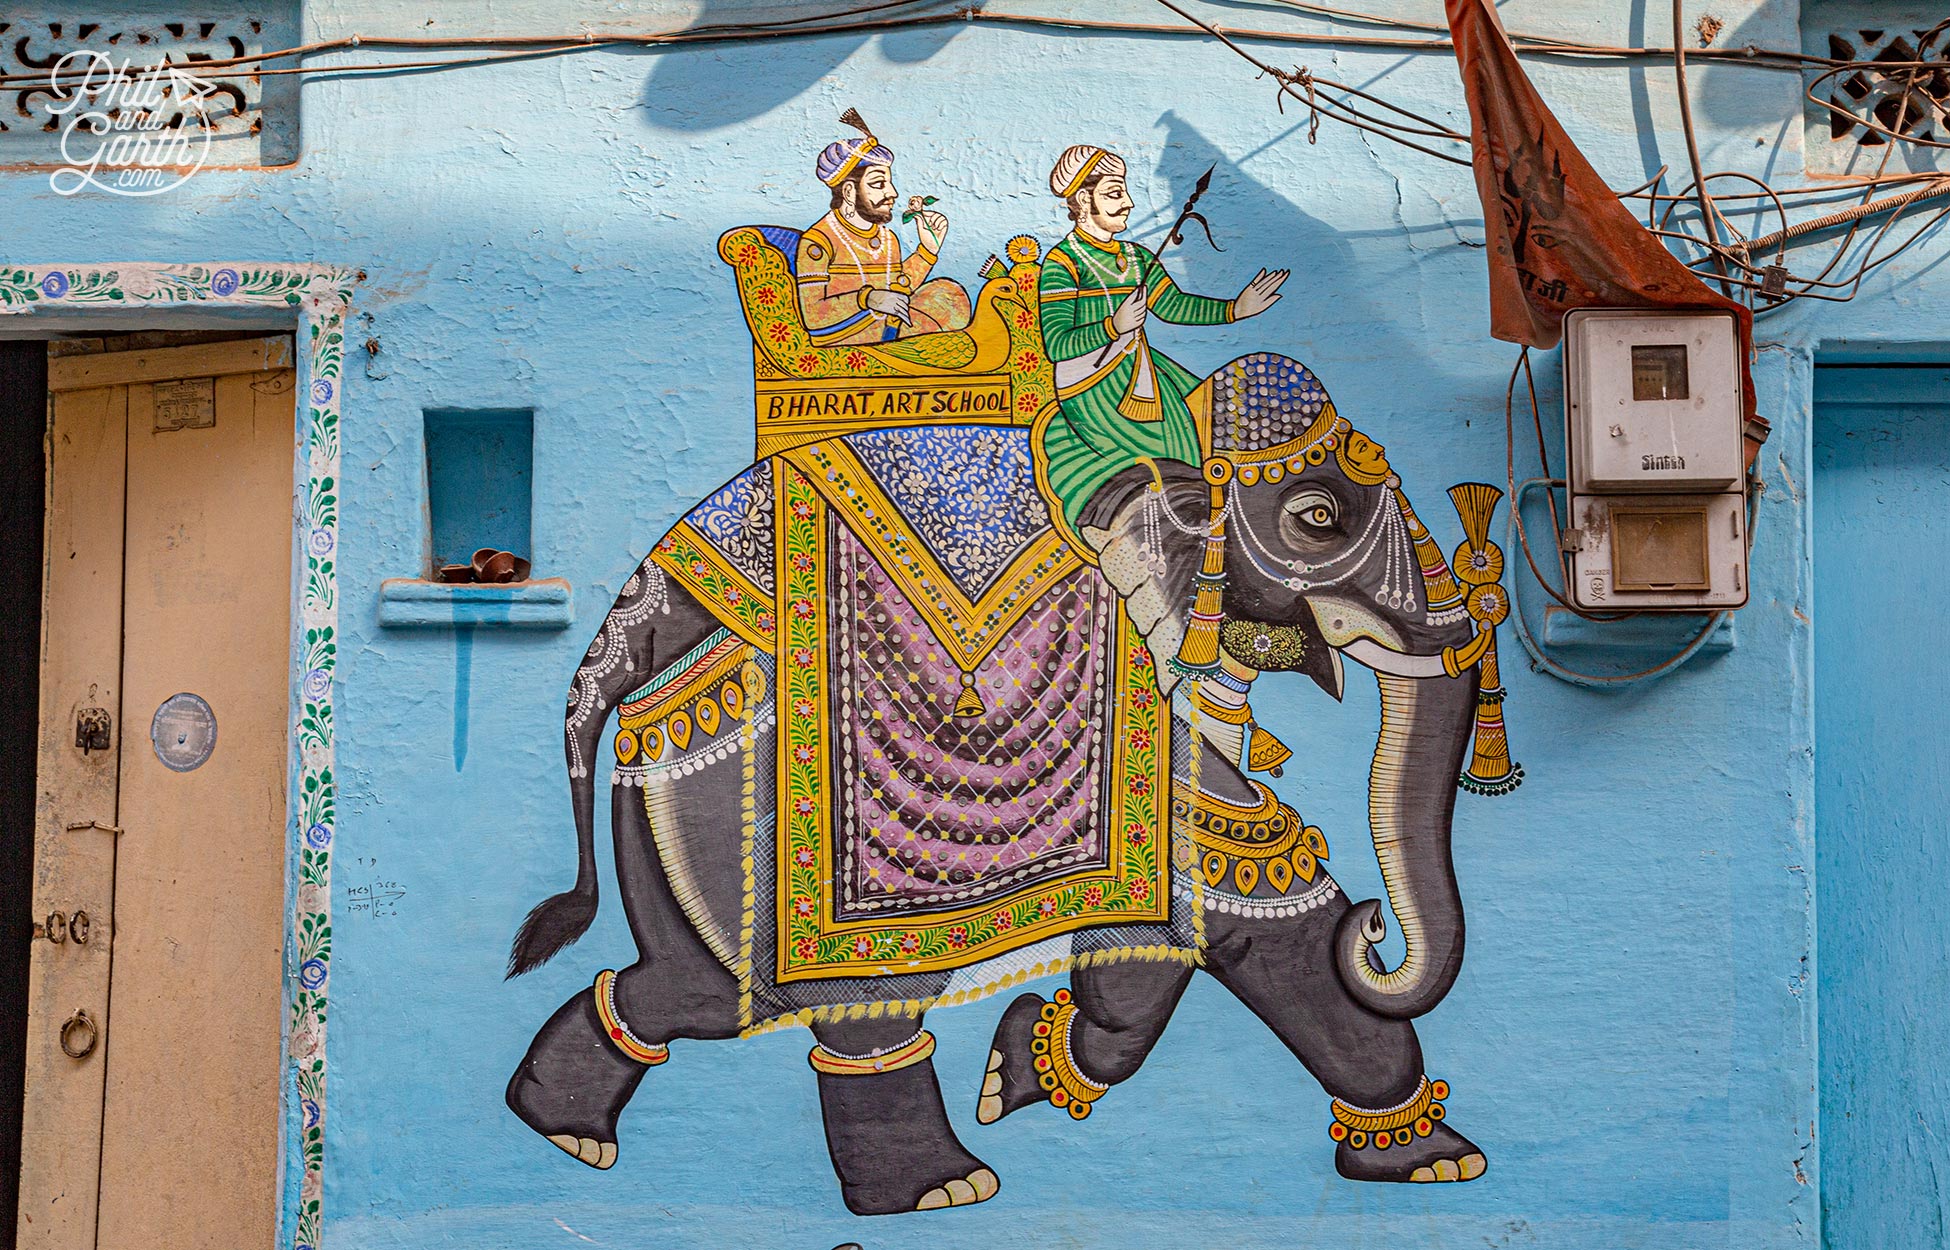 Some beautiful murals can be found on walls around Udaipur